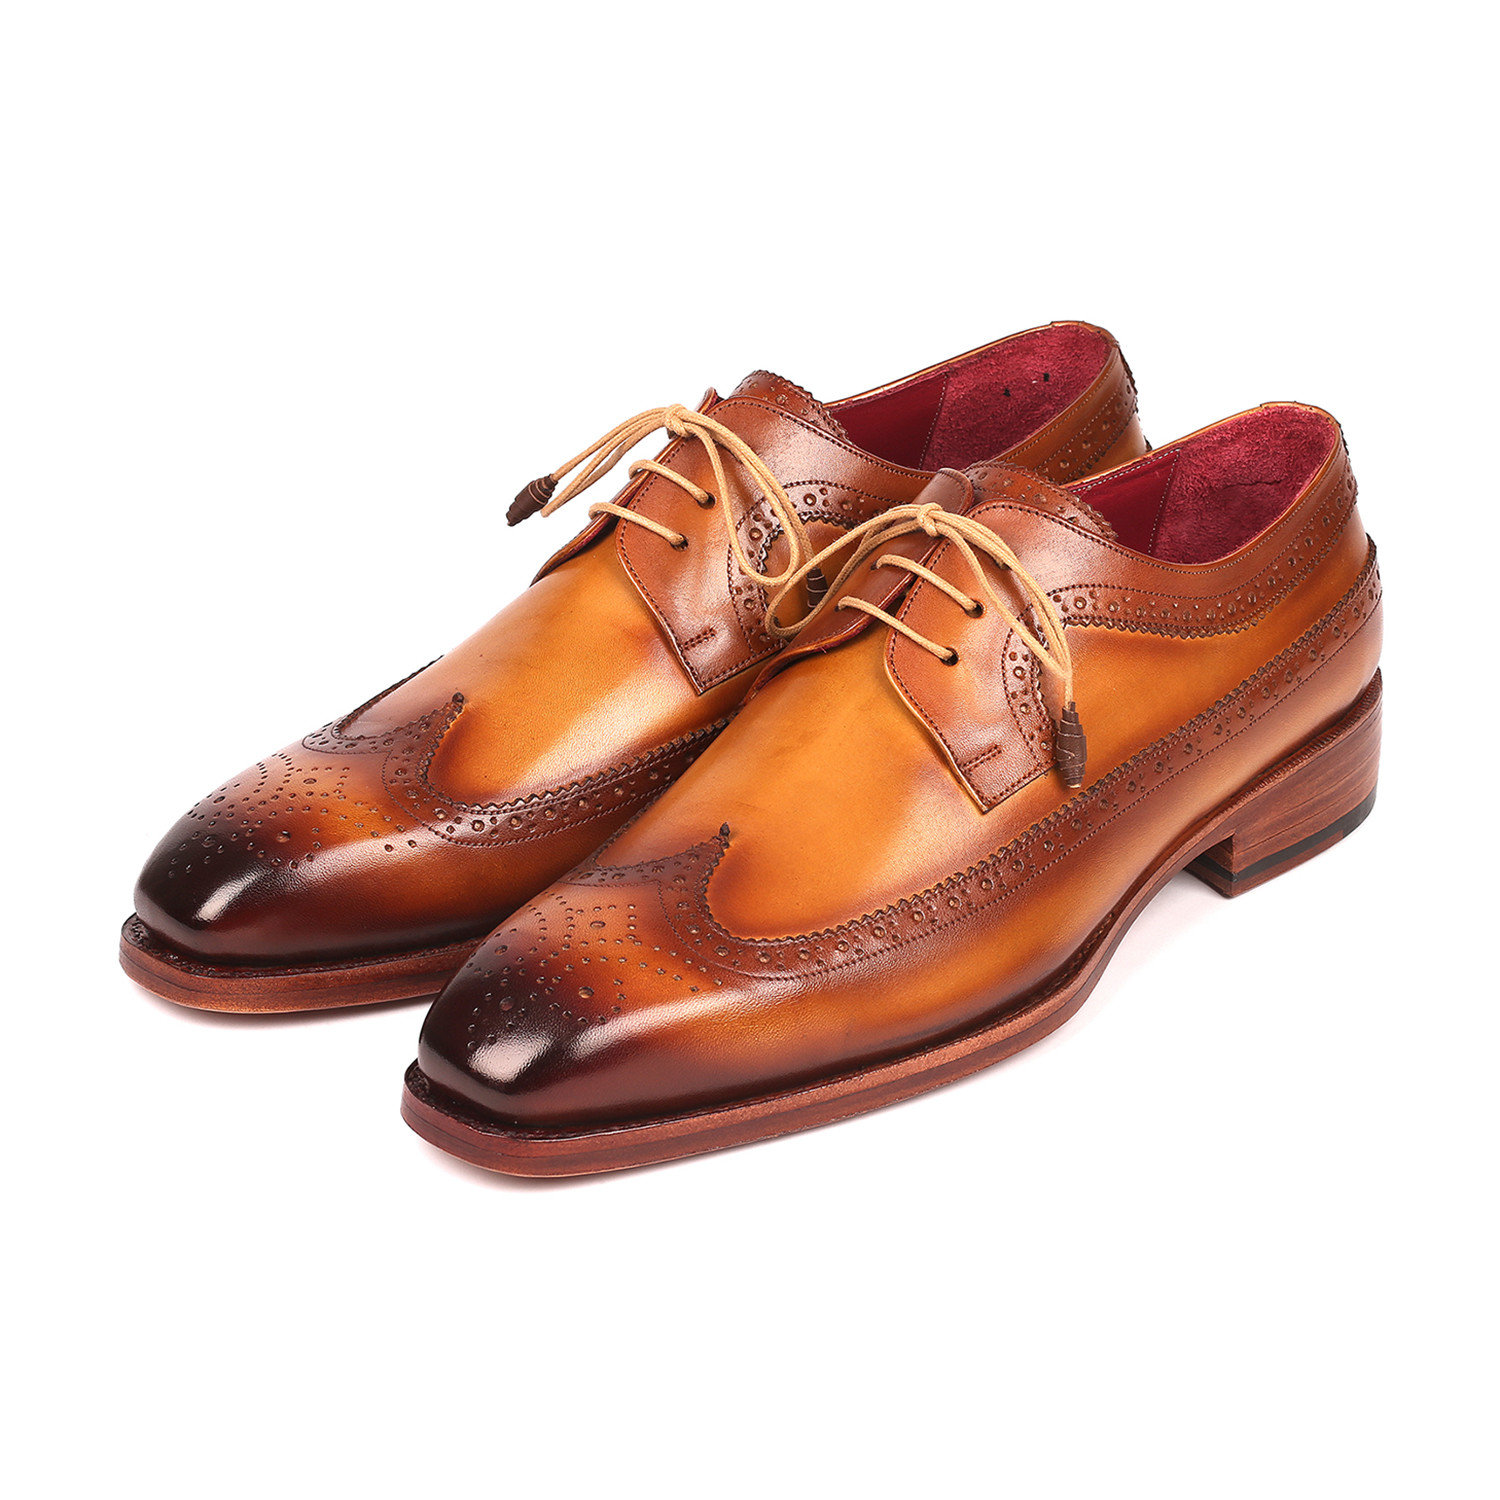 Goodyear Welted Wingtip Derby Shoes // Camel (Euro: 38) - Paul Parkman ...